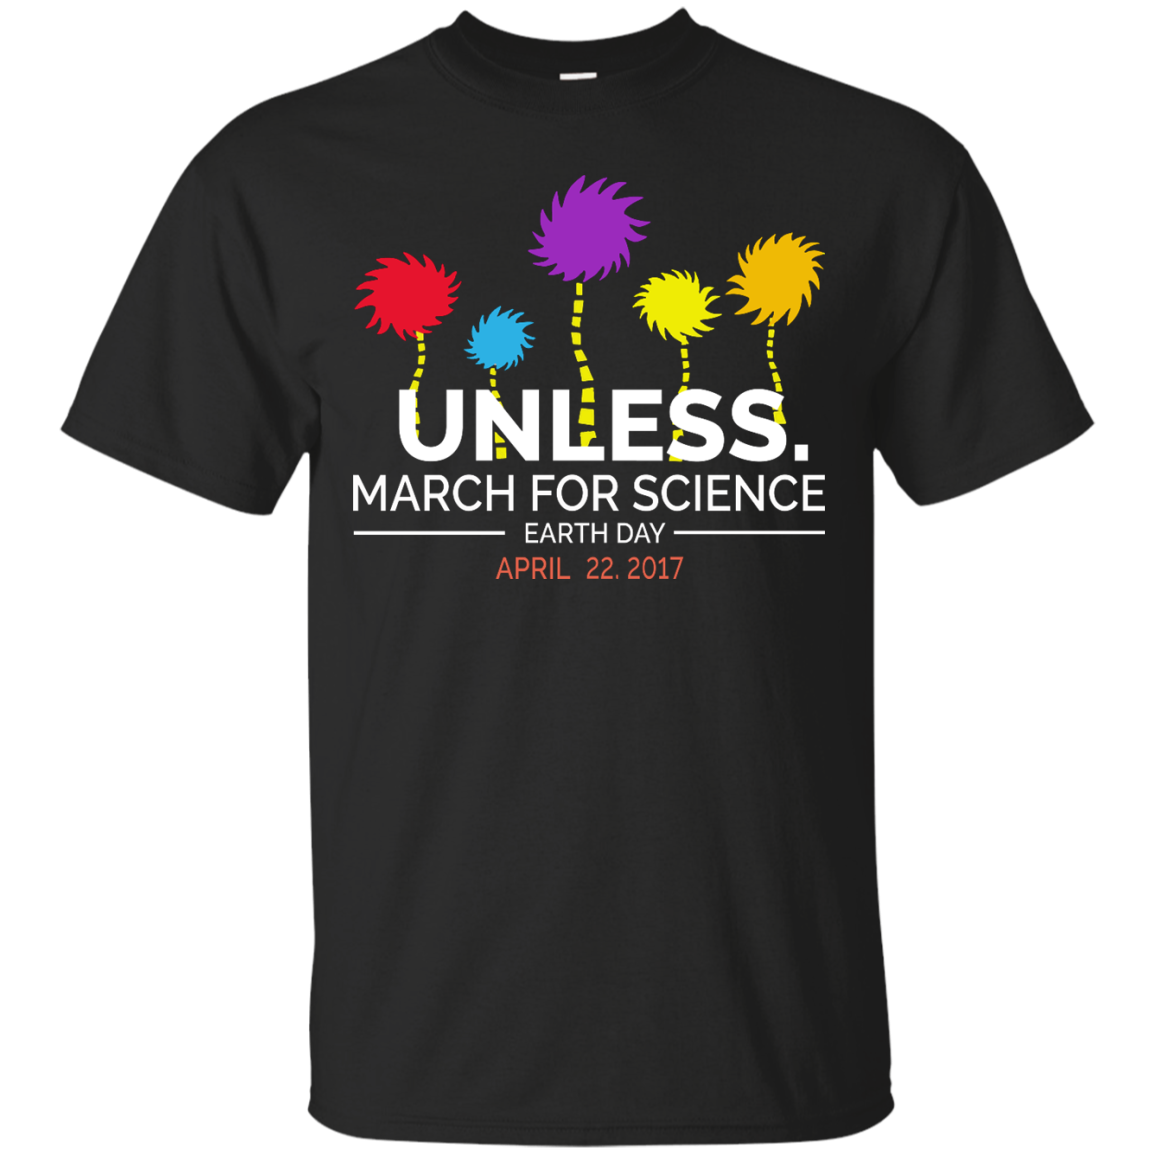 Unless March for Science Earth Day Shirt, Hoodie, Sweater